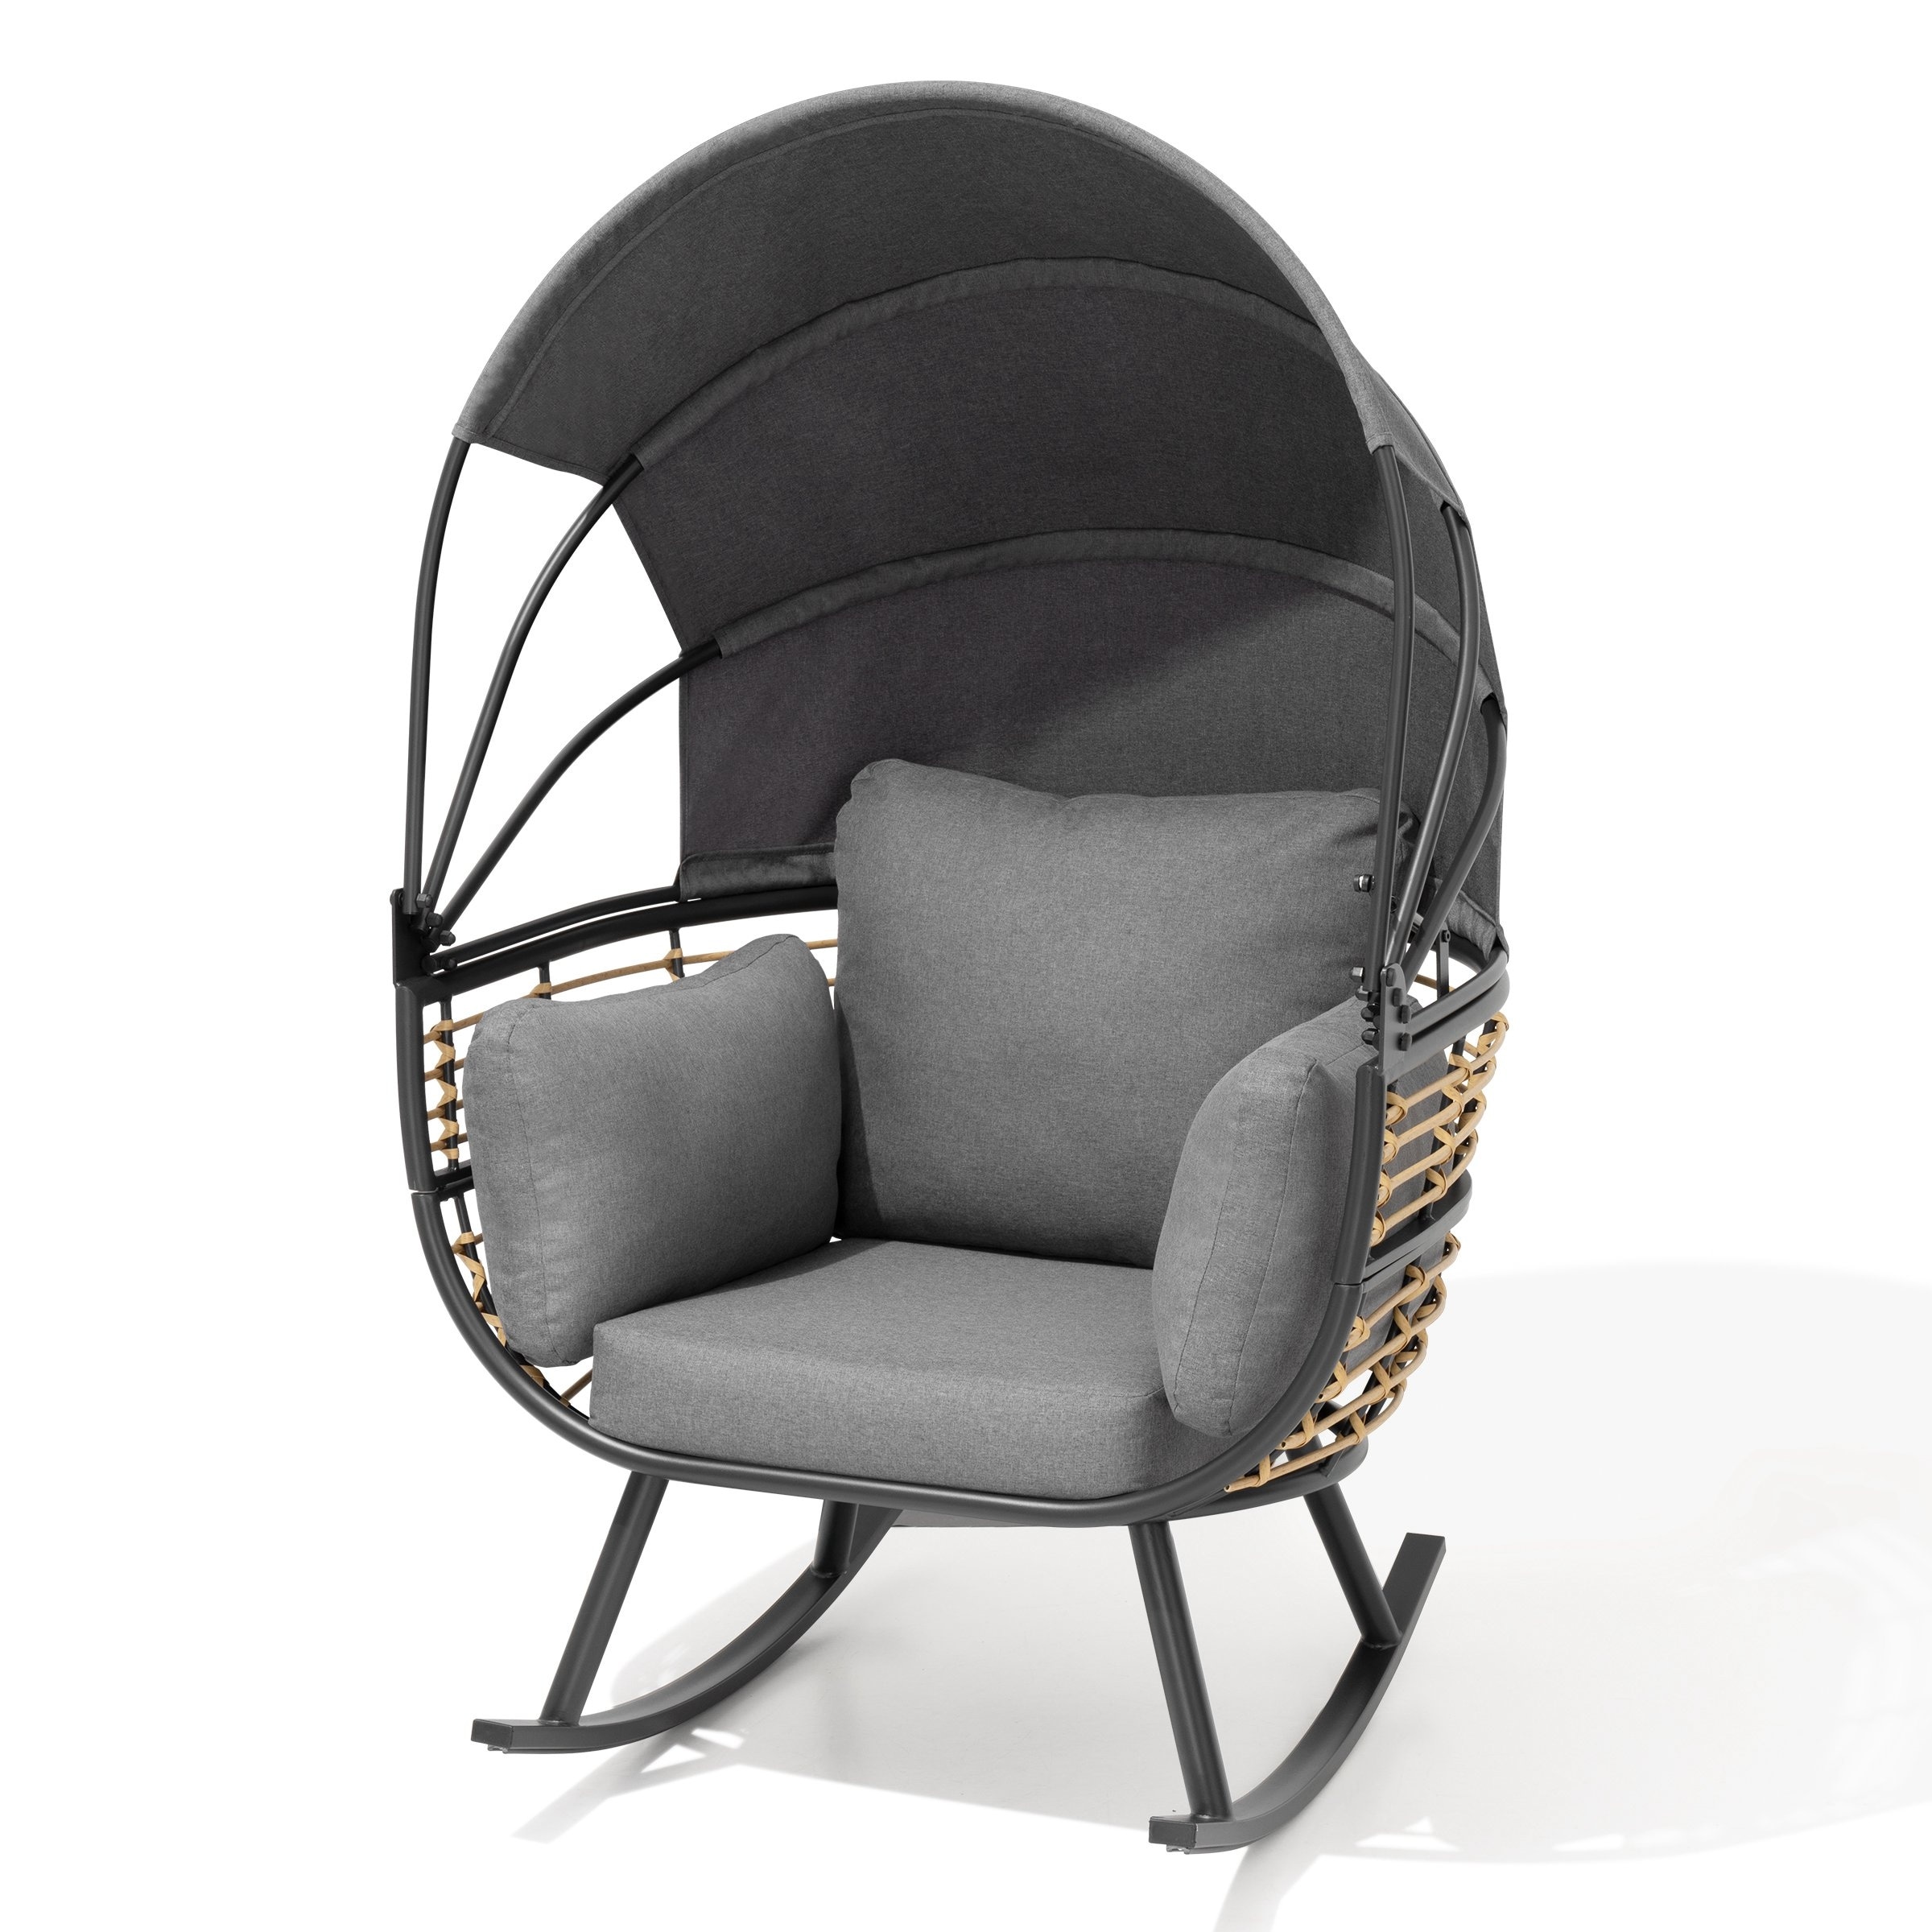 Outdoor Indoor Cushioned Egg Chair Metal Frame Pe Rattan Wicker Rocker With Retractable Sun Shade